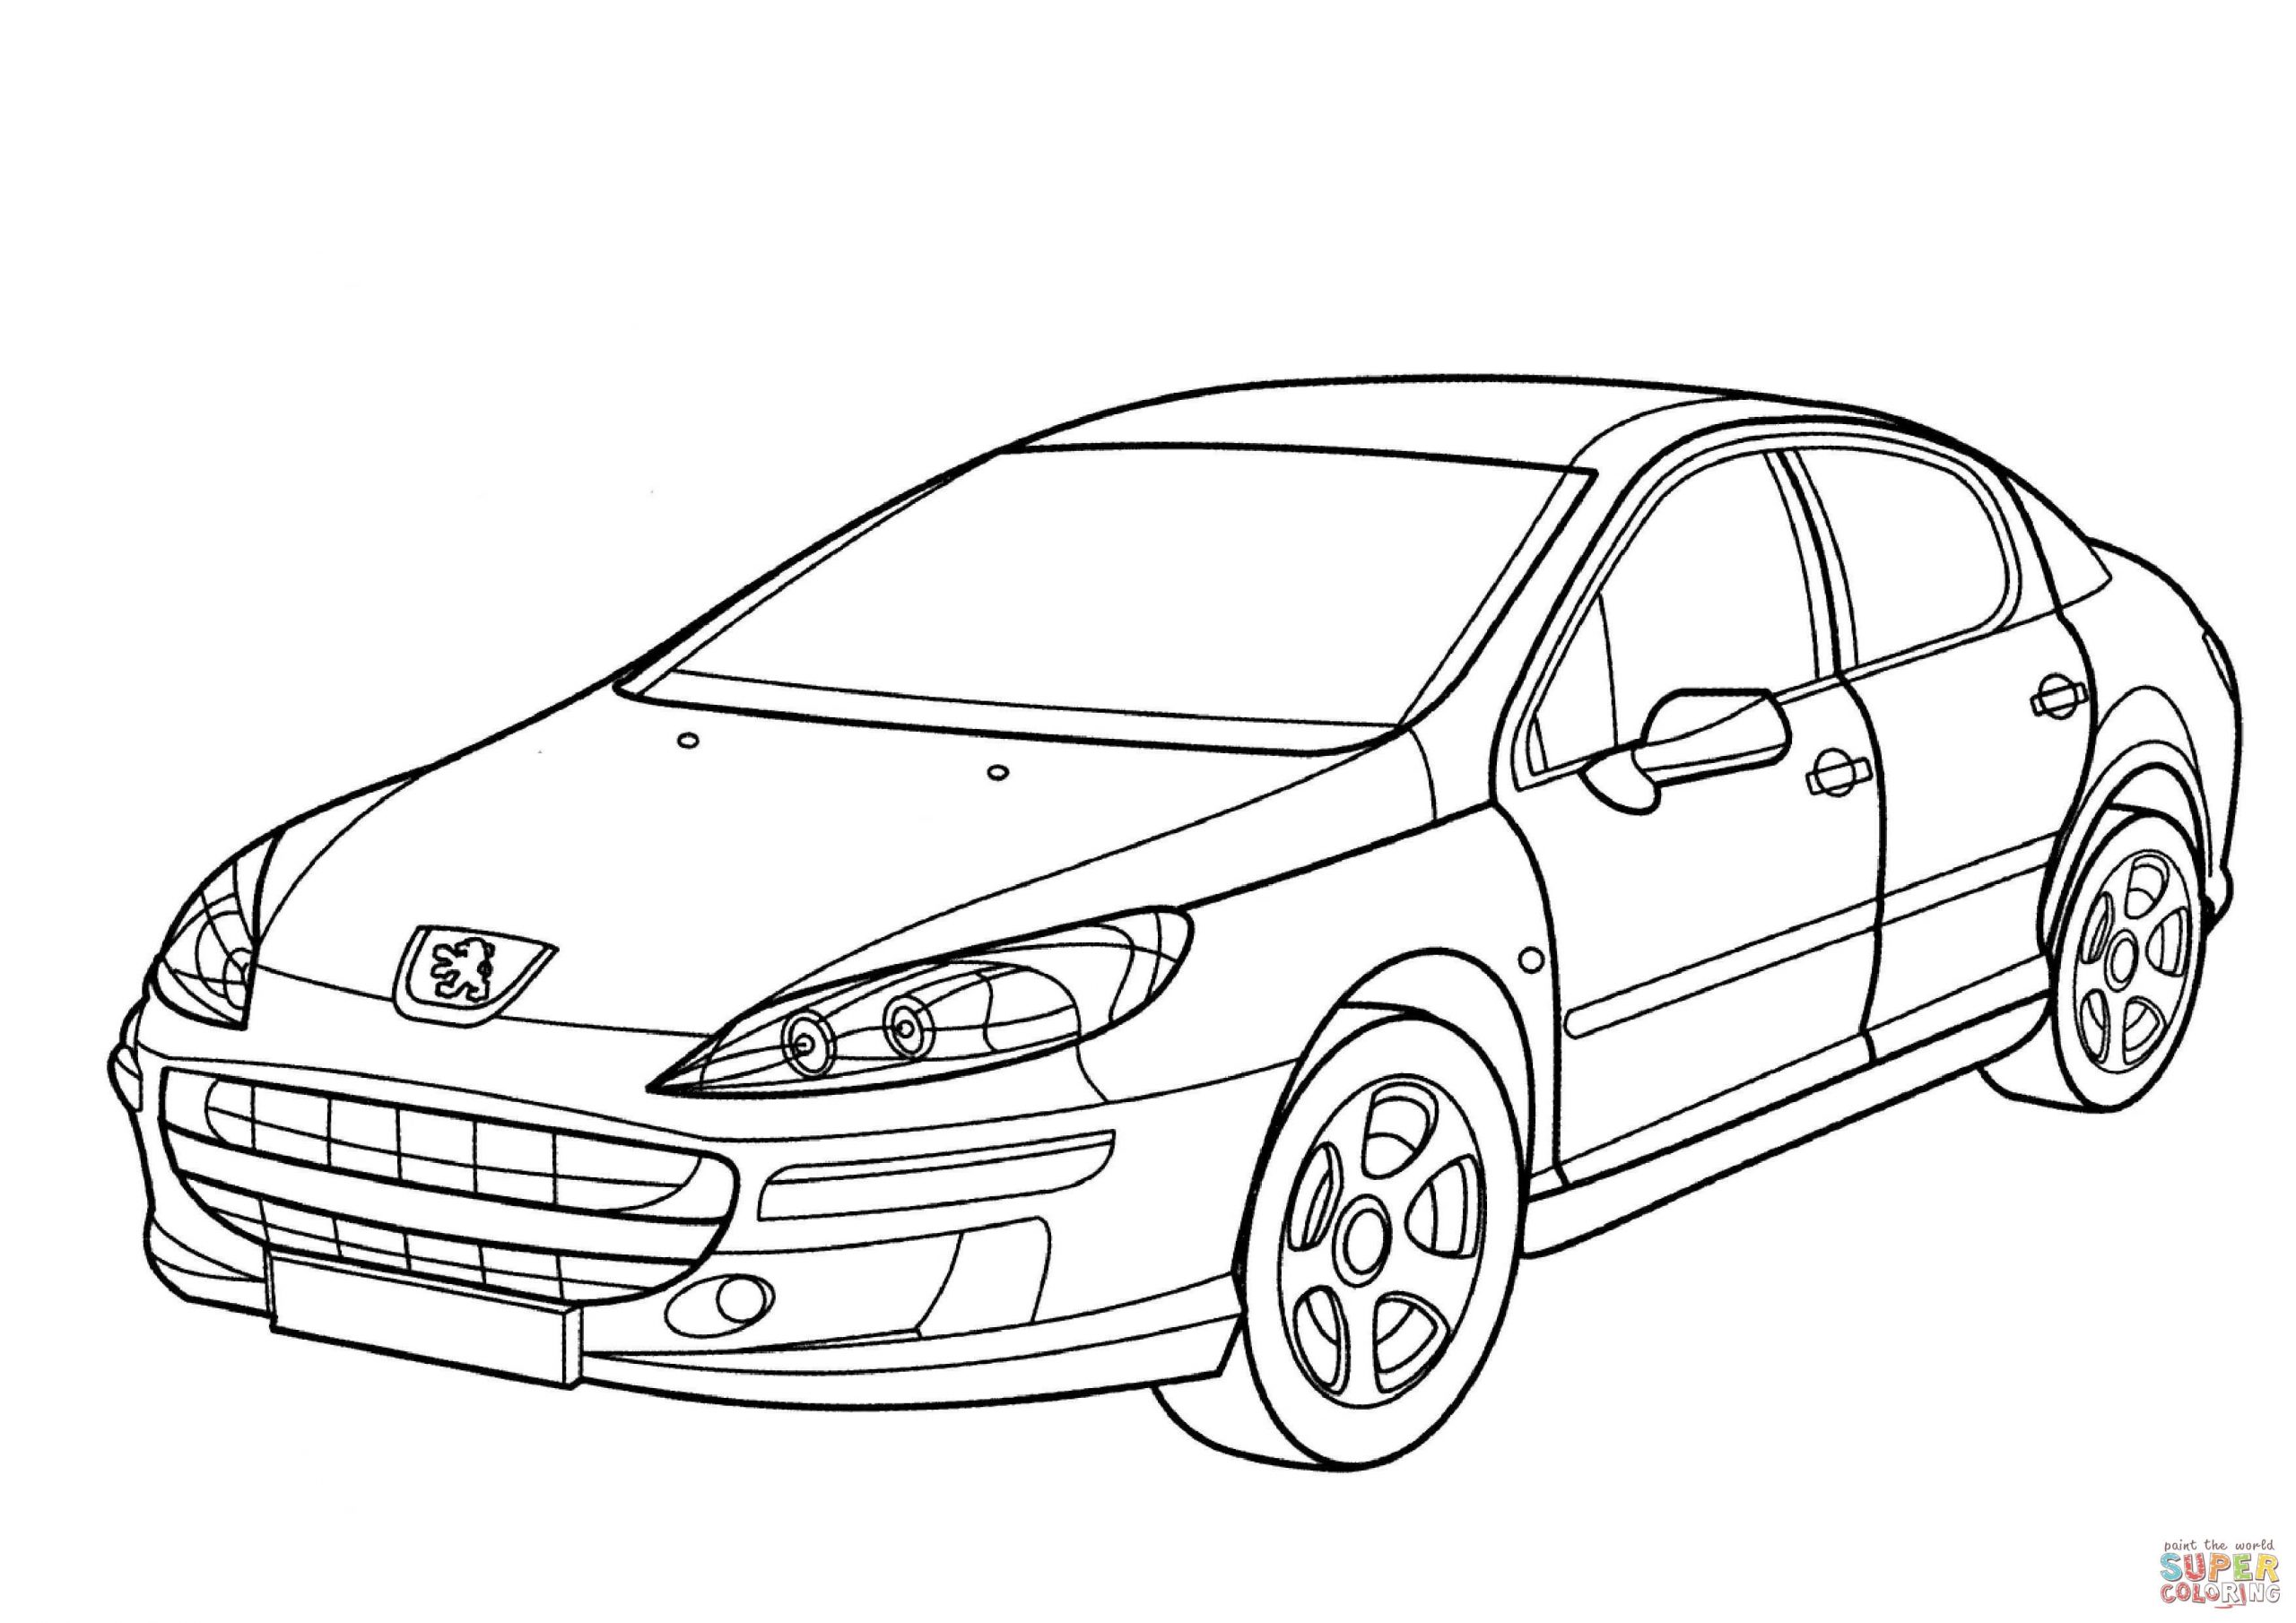 Coloring Pages : 45 Phenomenal Subaru Colouring Pages Printable Coloring  Pages For Adults‚ Subaru Coloring Pages‚ Paw Patrol Printables along with  Coloring Pagess